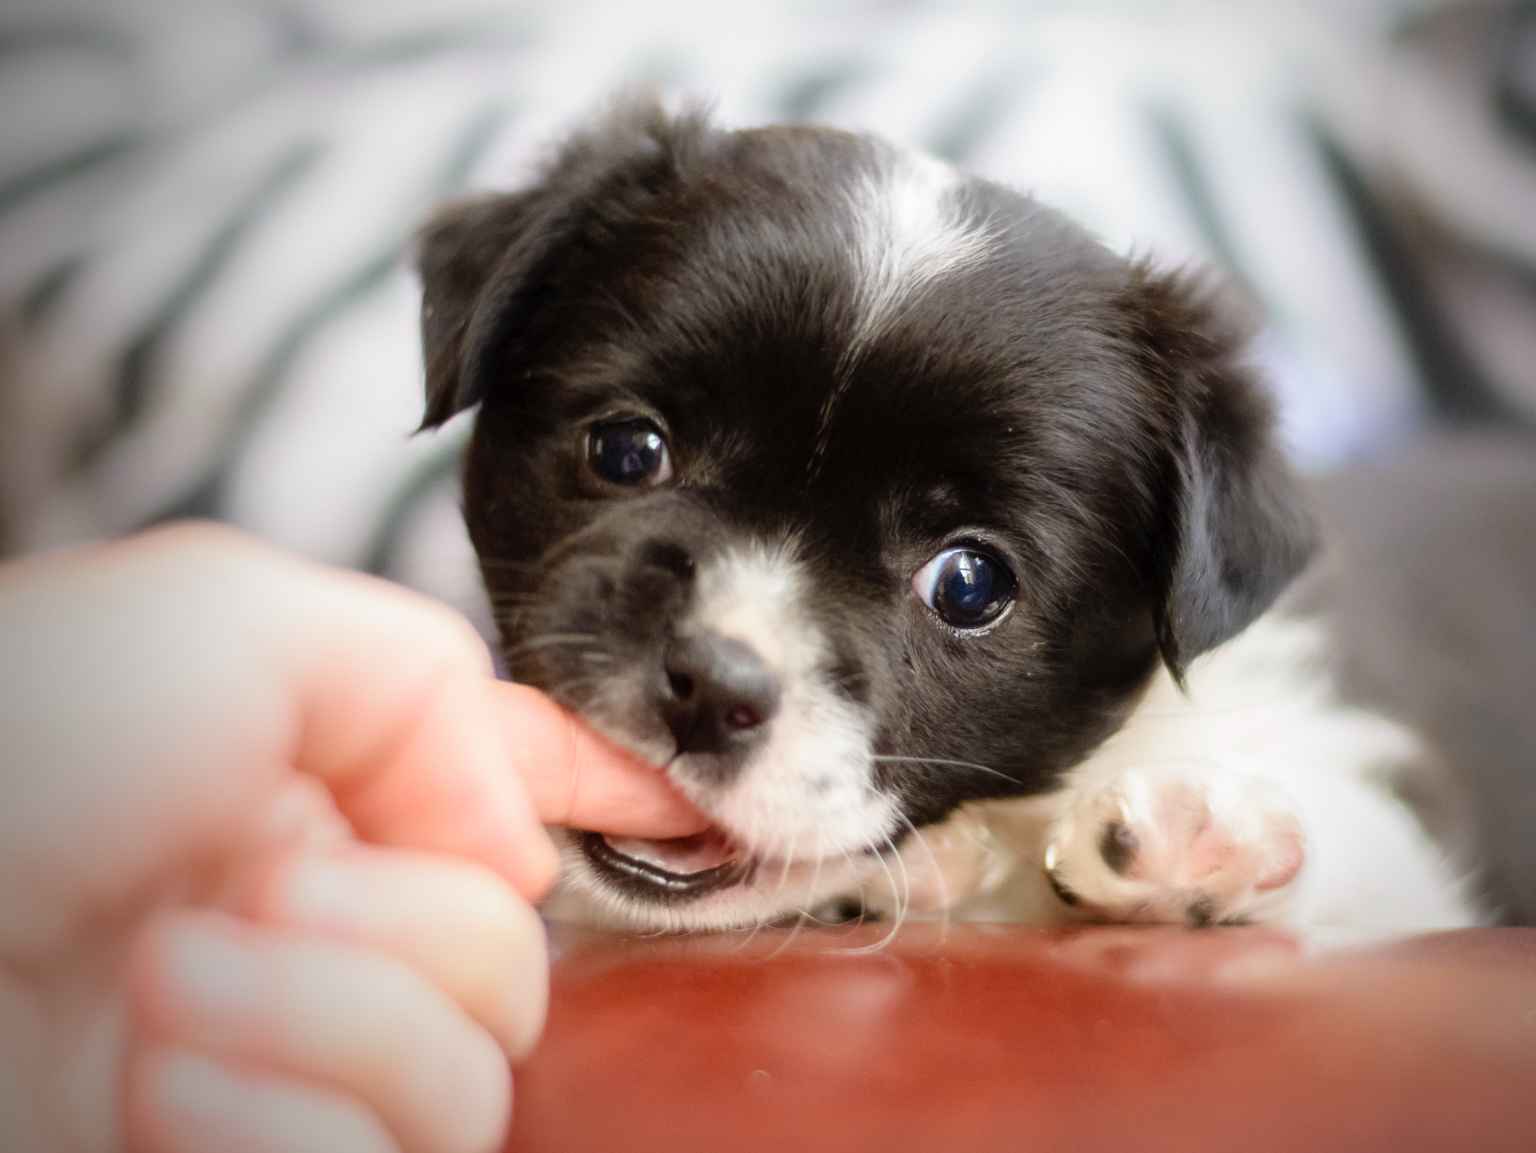 A black and white puppy nibbling on its owner's index finger